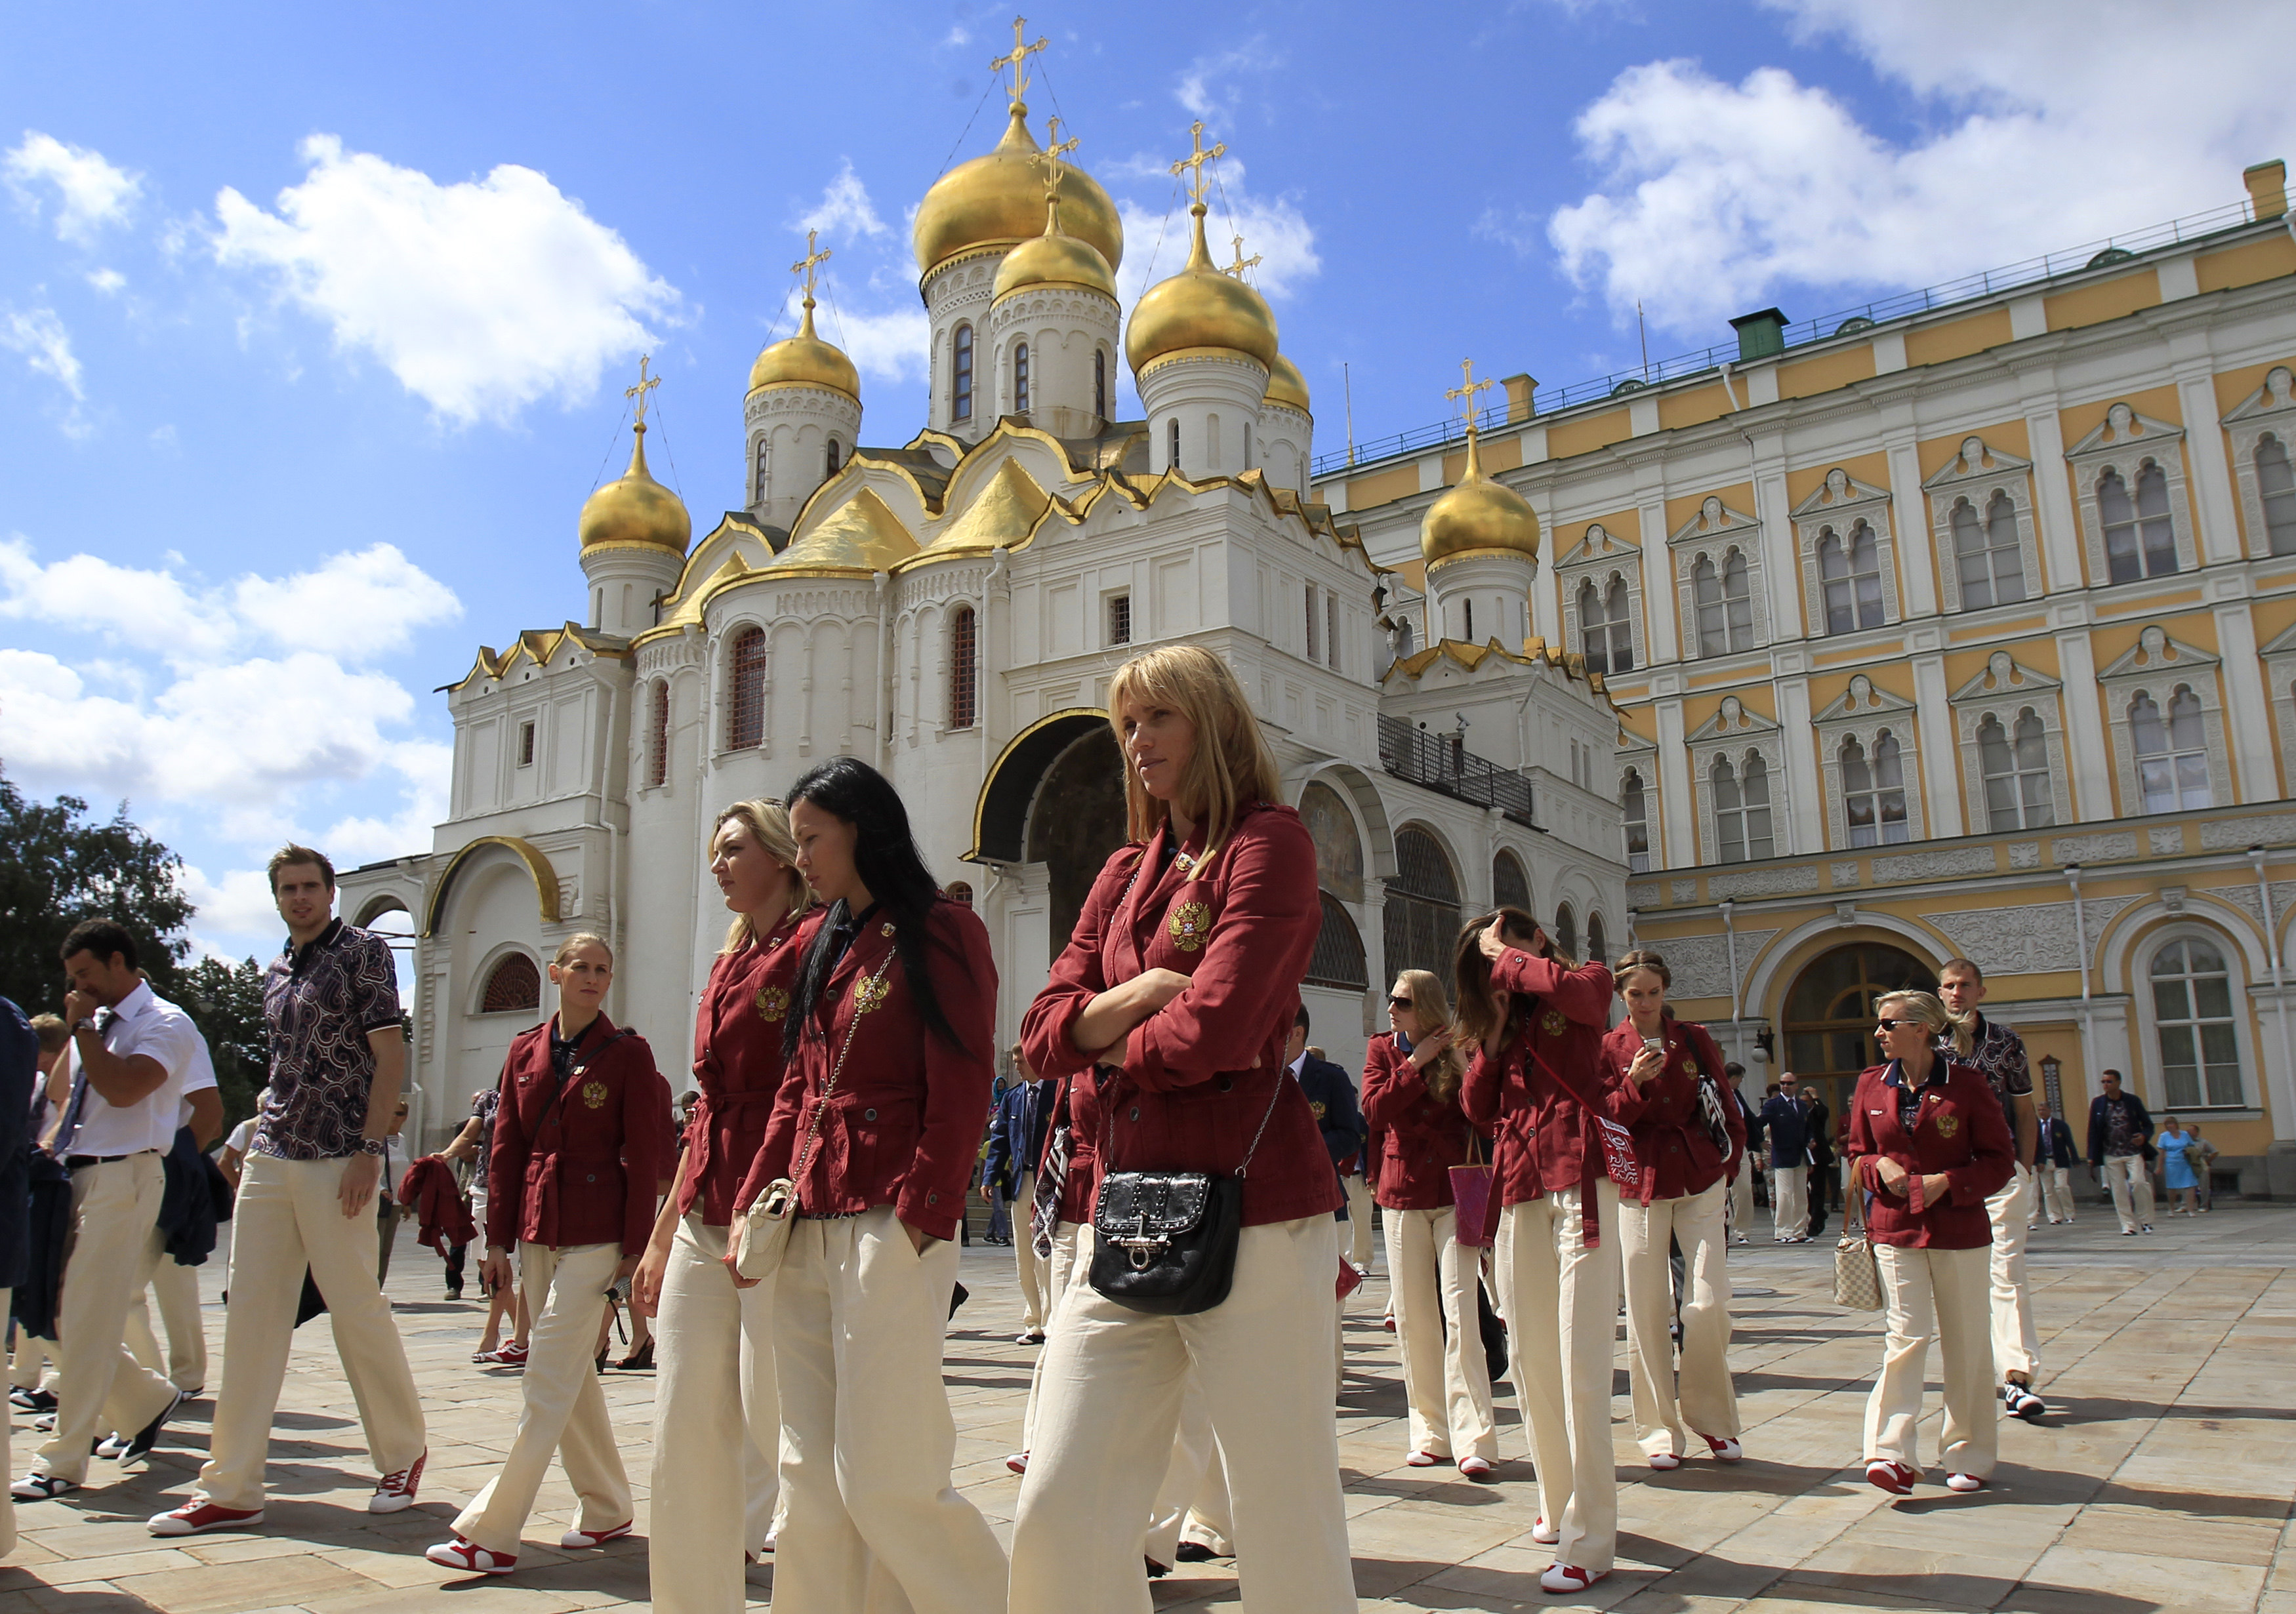 Members of the Russian national Olympic team walk after a meeting with Russian President Vladimir Putin before their departure for the 2012 London Olympic Games at the Kremlin in Moscow, Saturday, July 21, 2012. In the background is the Annunciation Cathedral and the Grand Kremlin Palace. (AP Photo/Sergei Karpukhin, Pool)